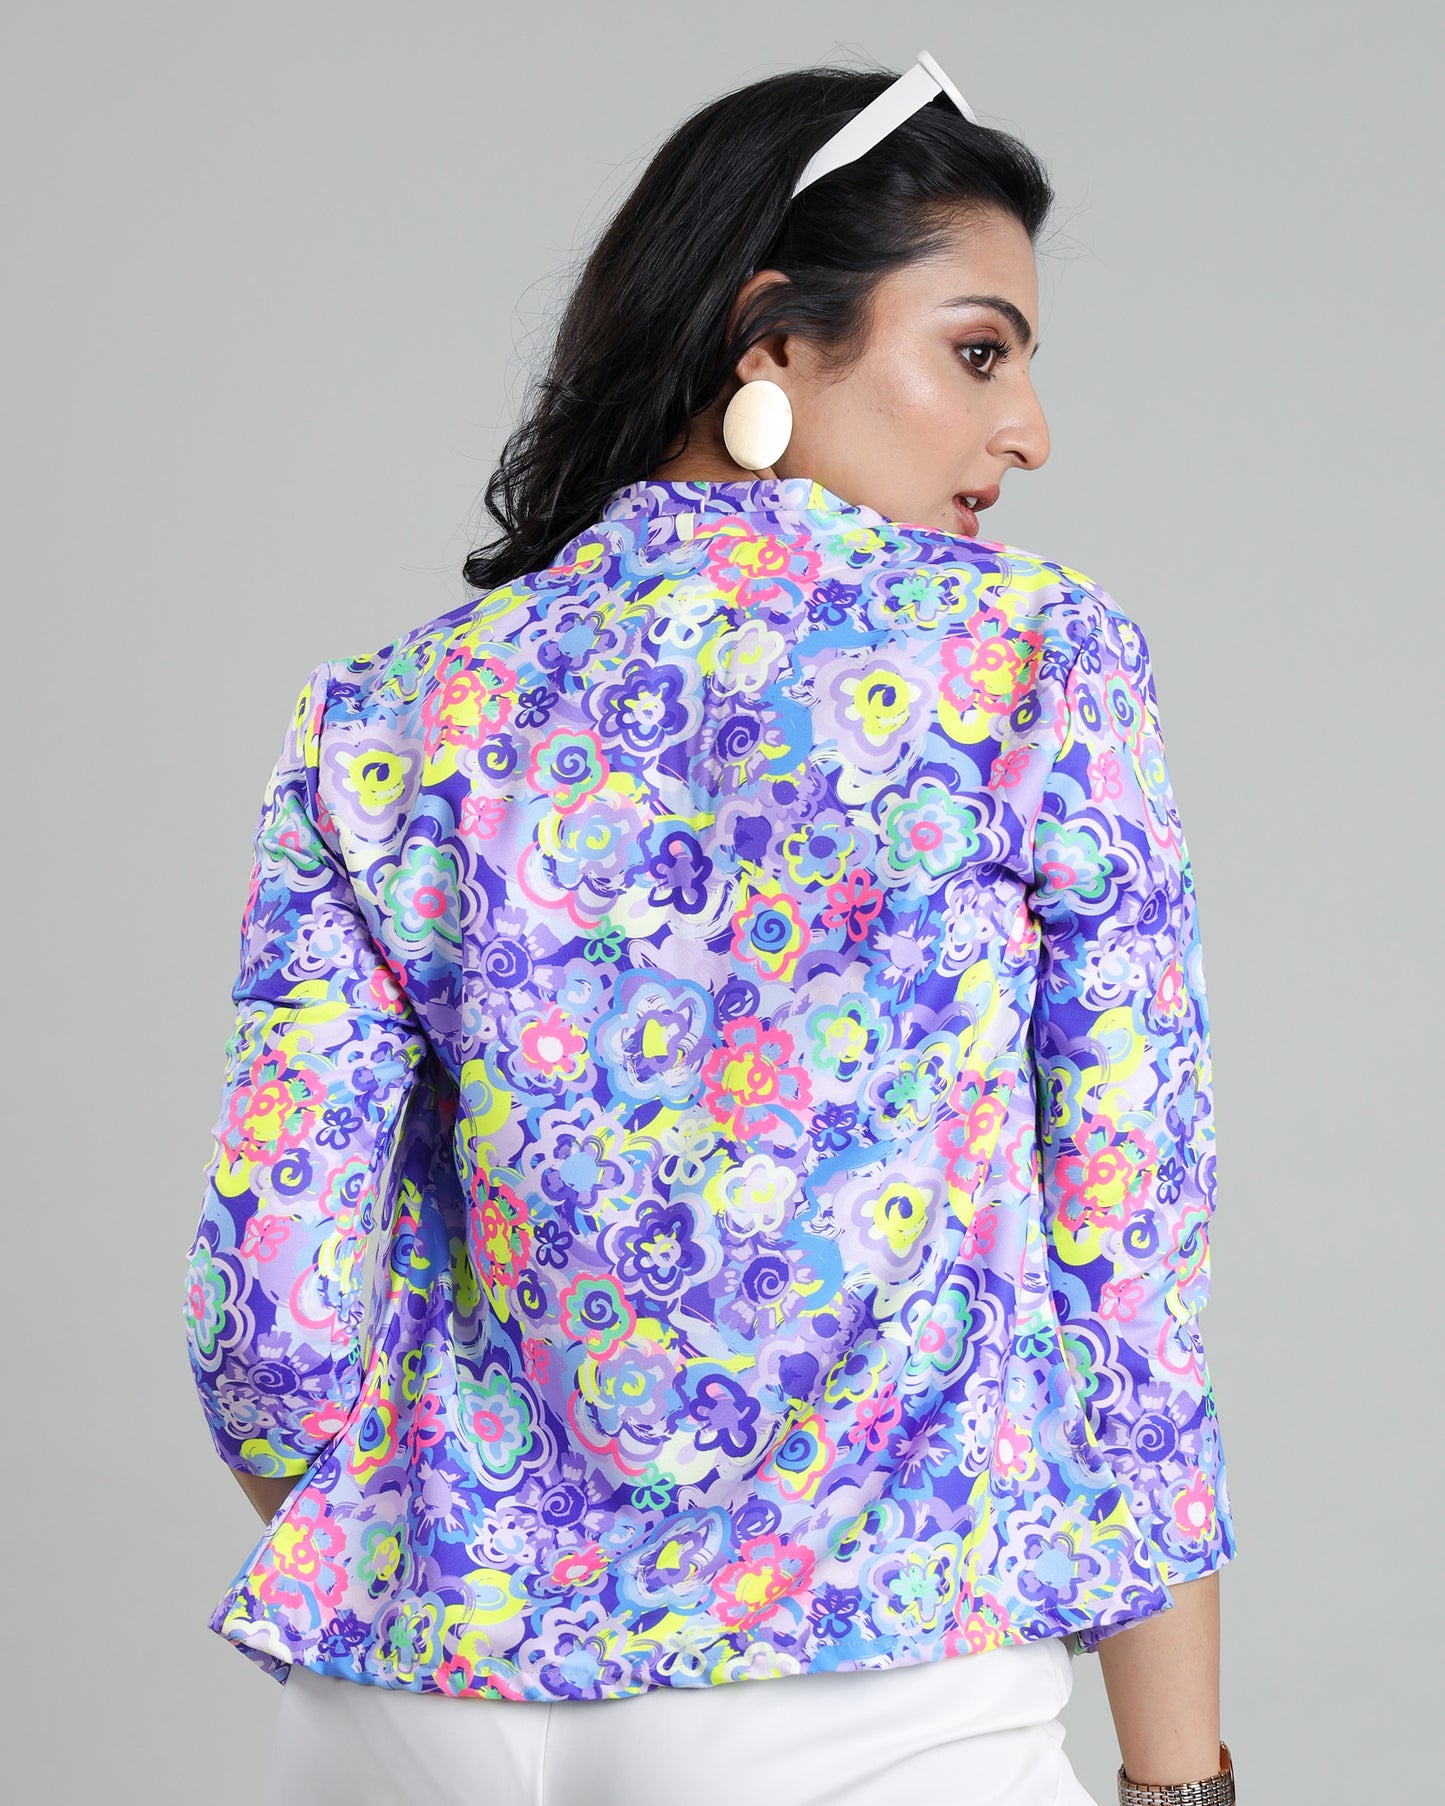 Neon Edition: The Boldest Jacket You Own